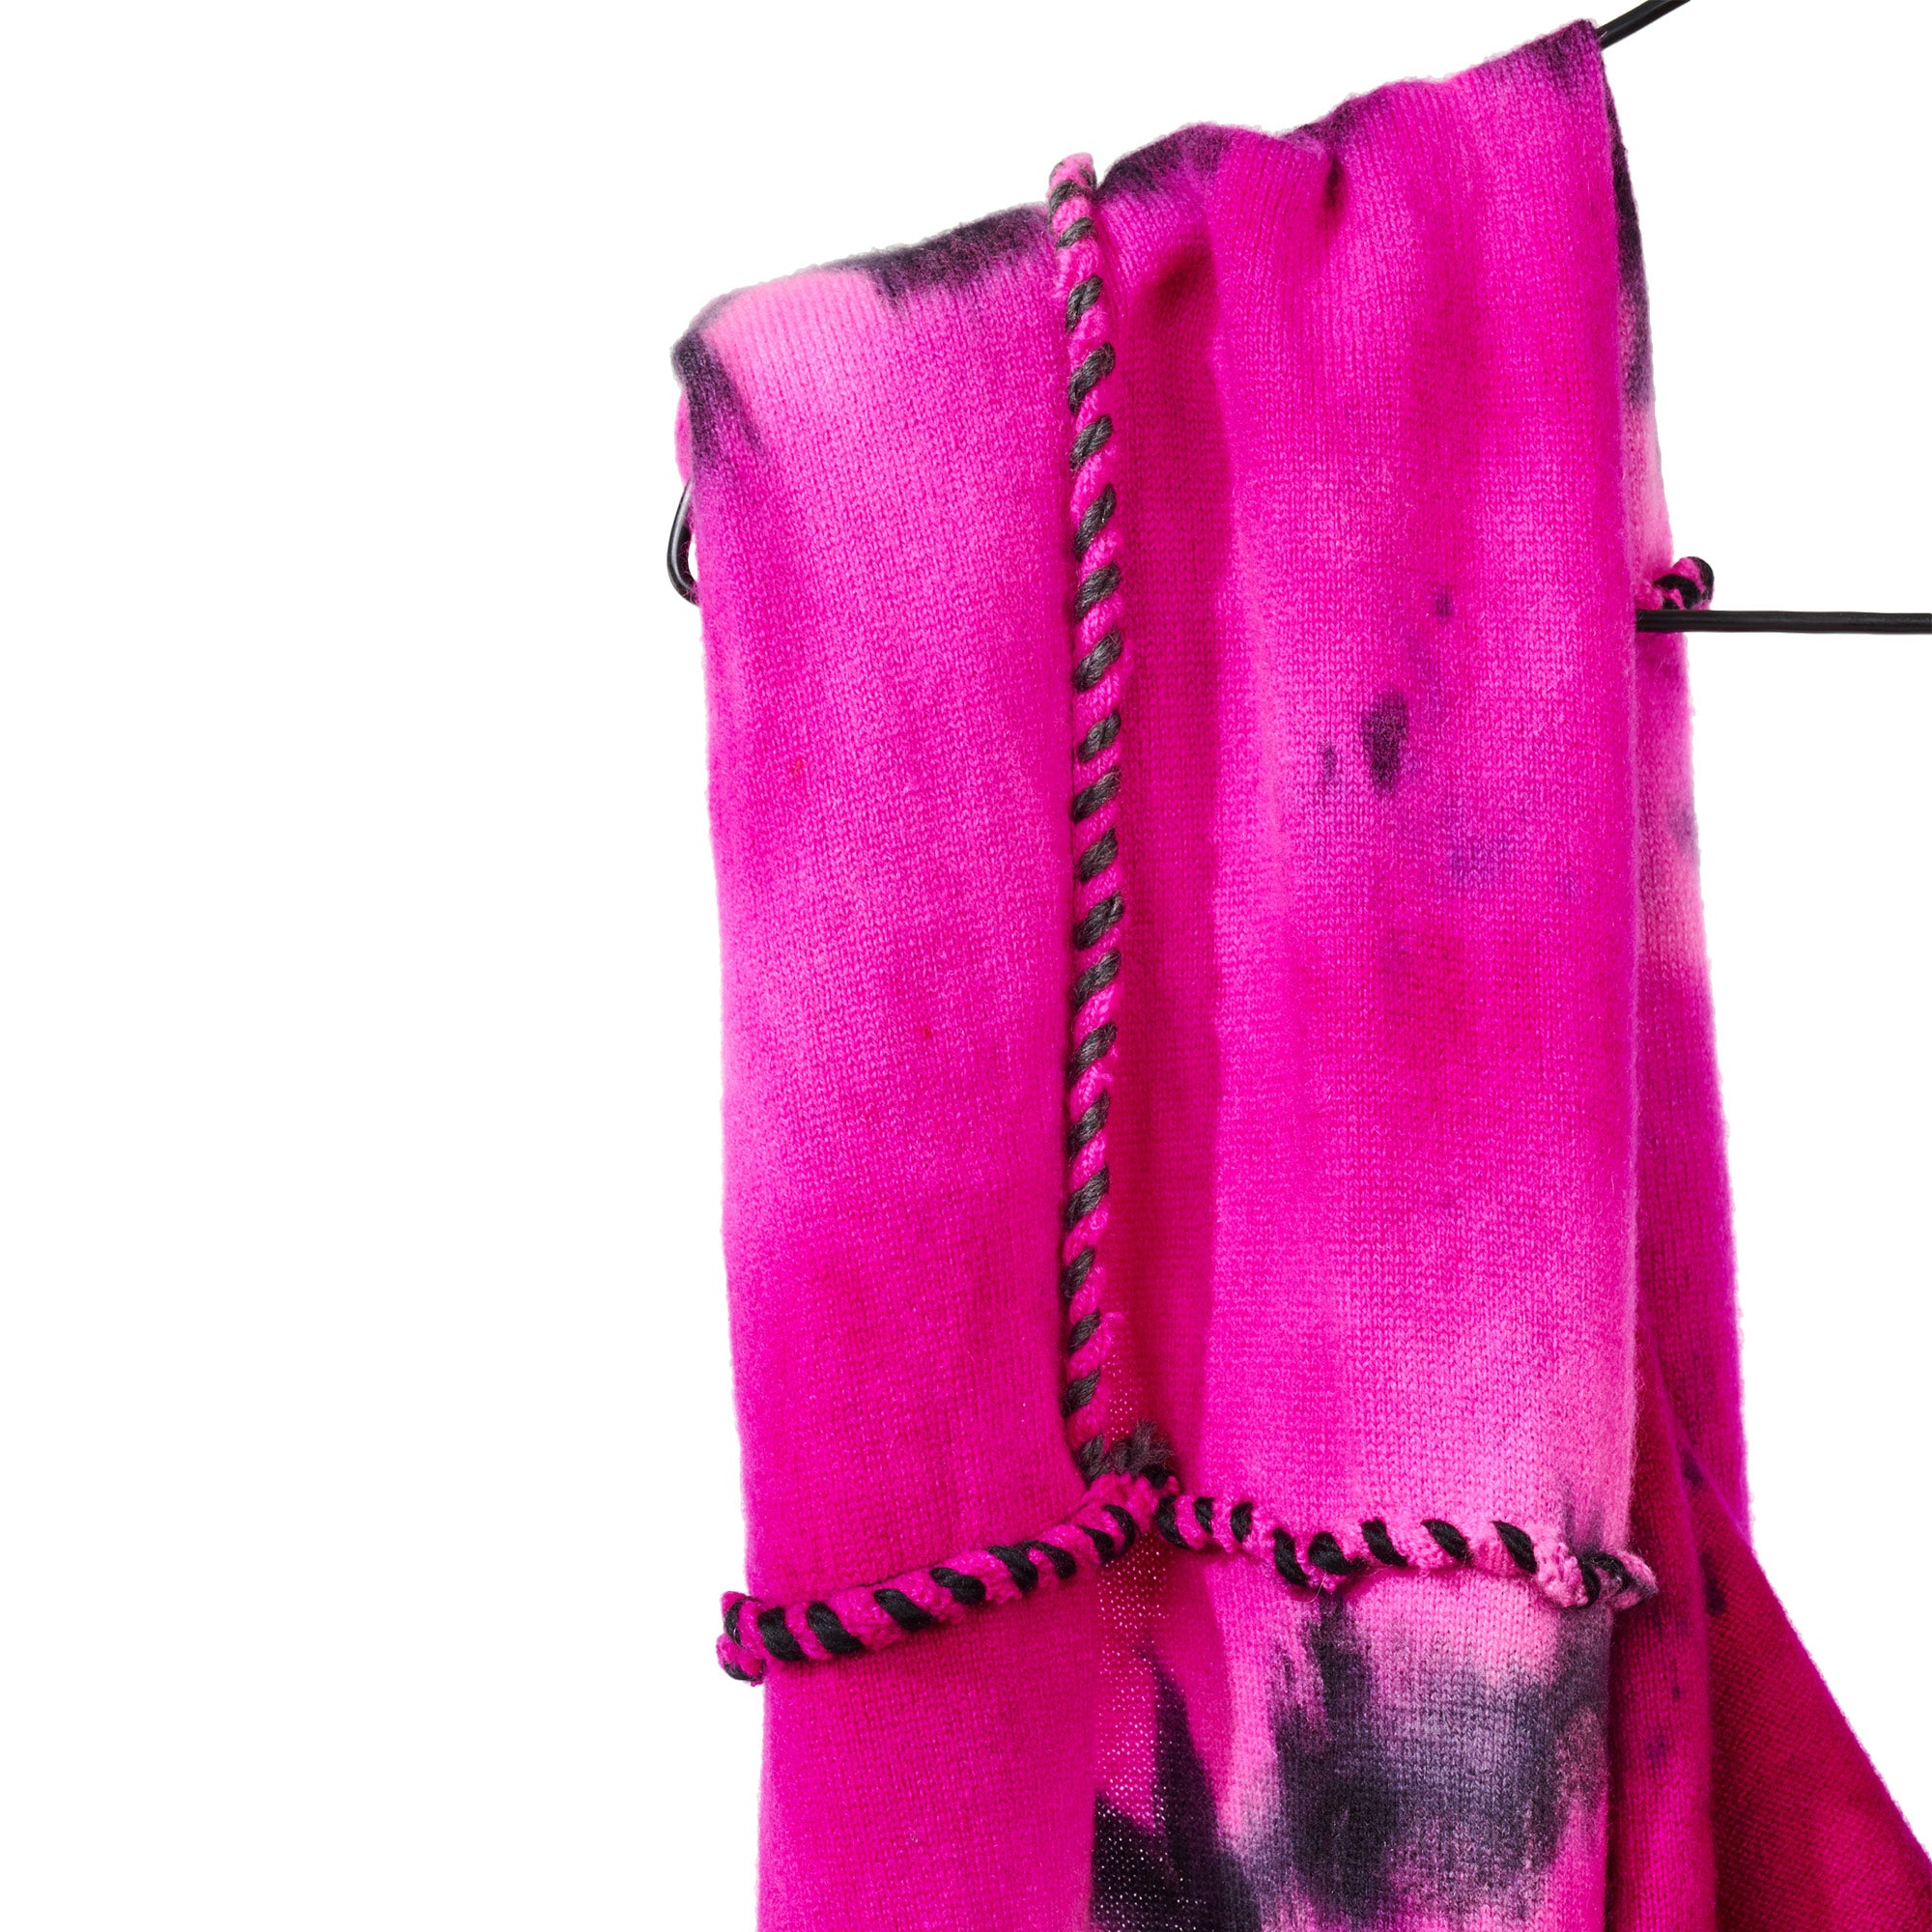 Whipped Coil Threaded Scarf - Hot Pink